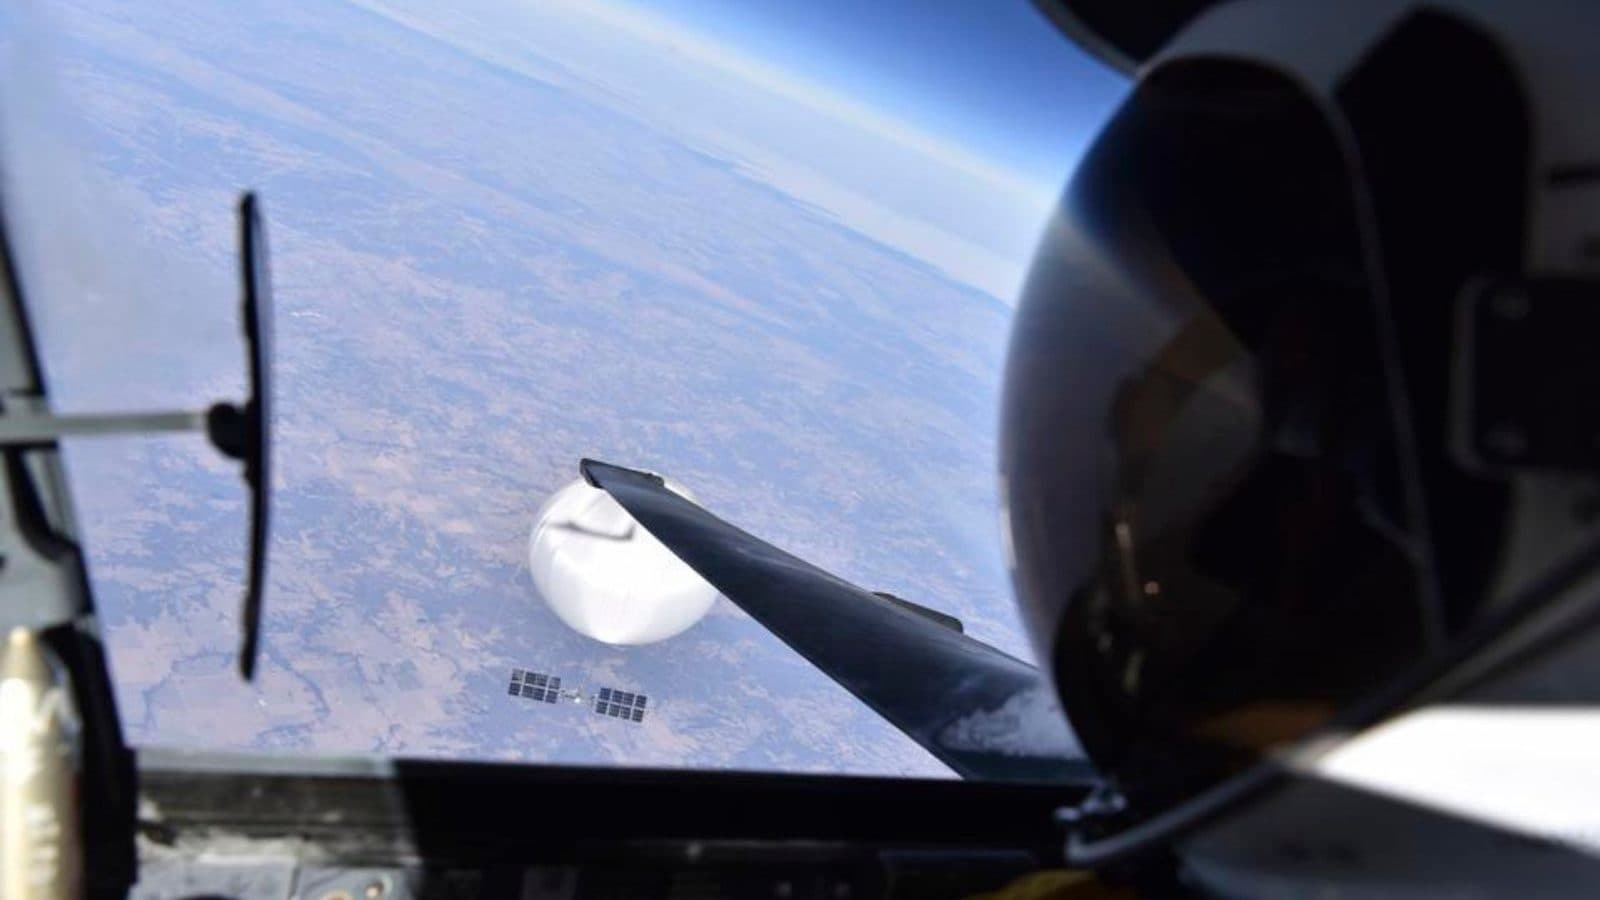 US Releases Selfie Taken by Pilot Showing Chinese Spy Balloon at 60,000 Feet